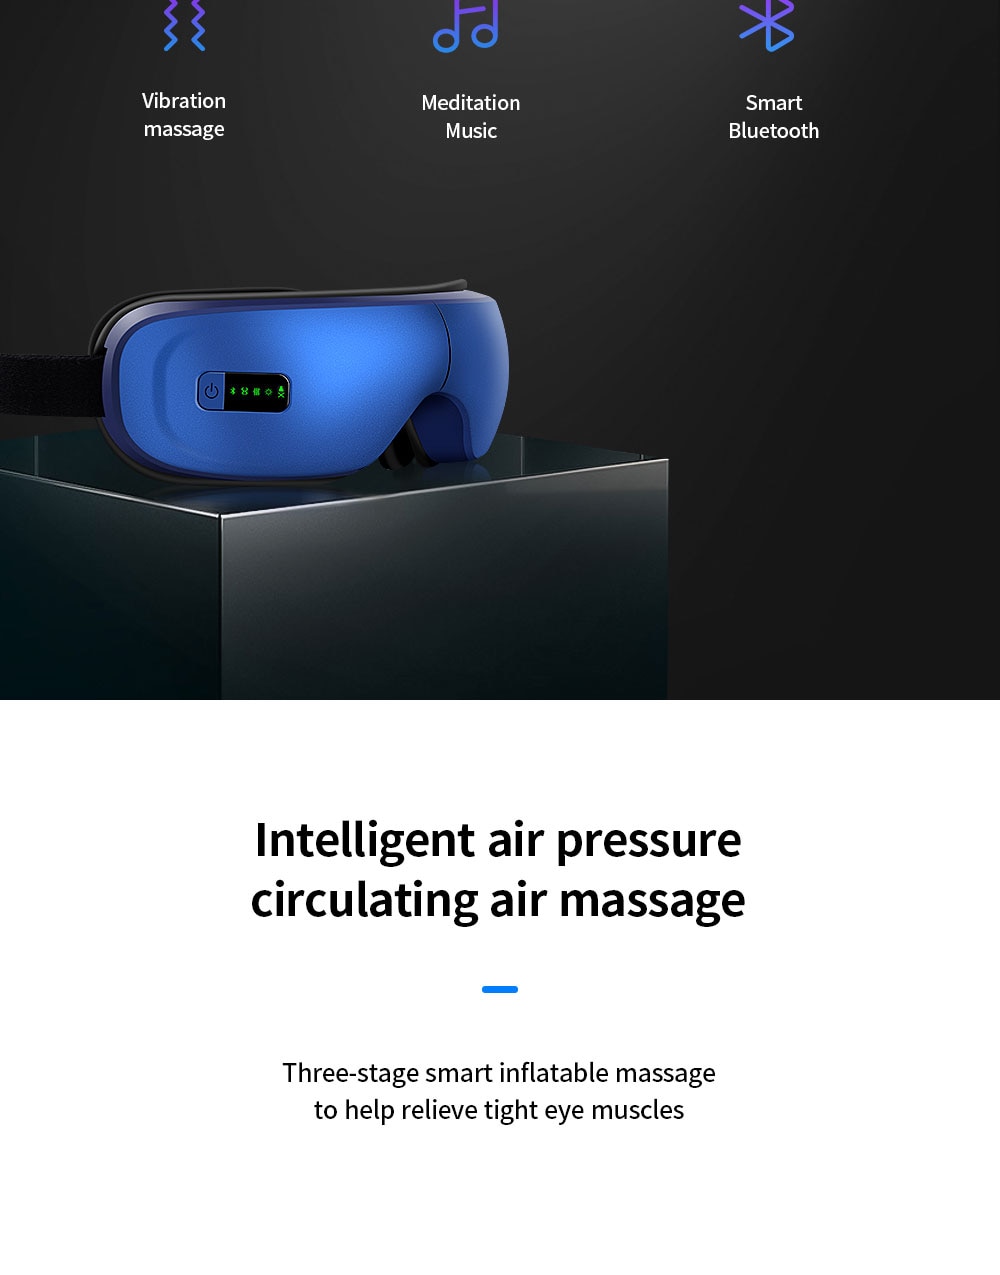 Electric Wireless Eye Massager Heating Therapy Air Pressure Eye SPA Bluetooth Music Eyes Stress Relief Device USB Recharge Fold